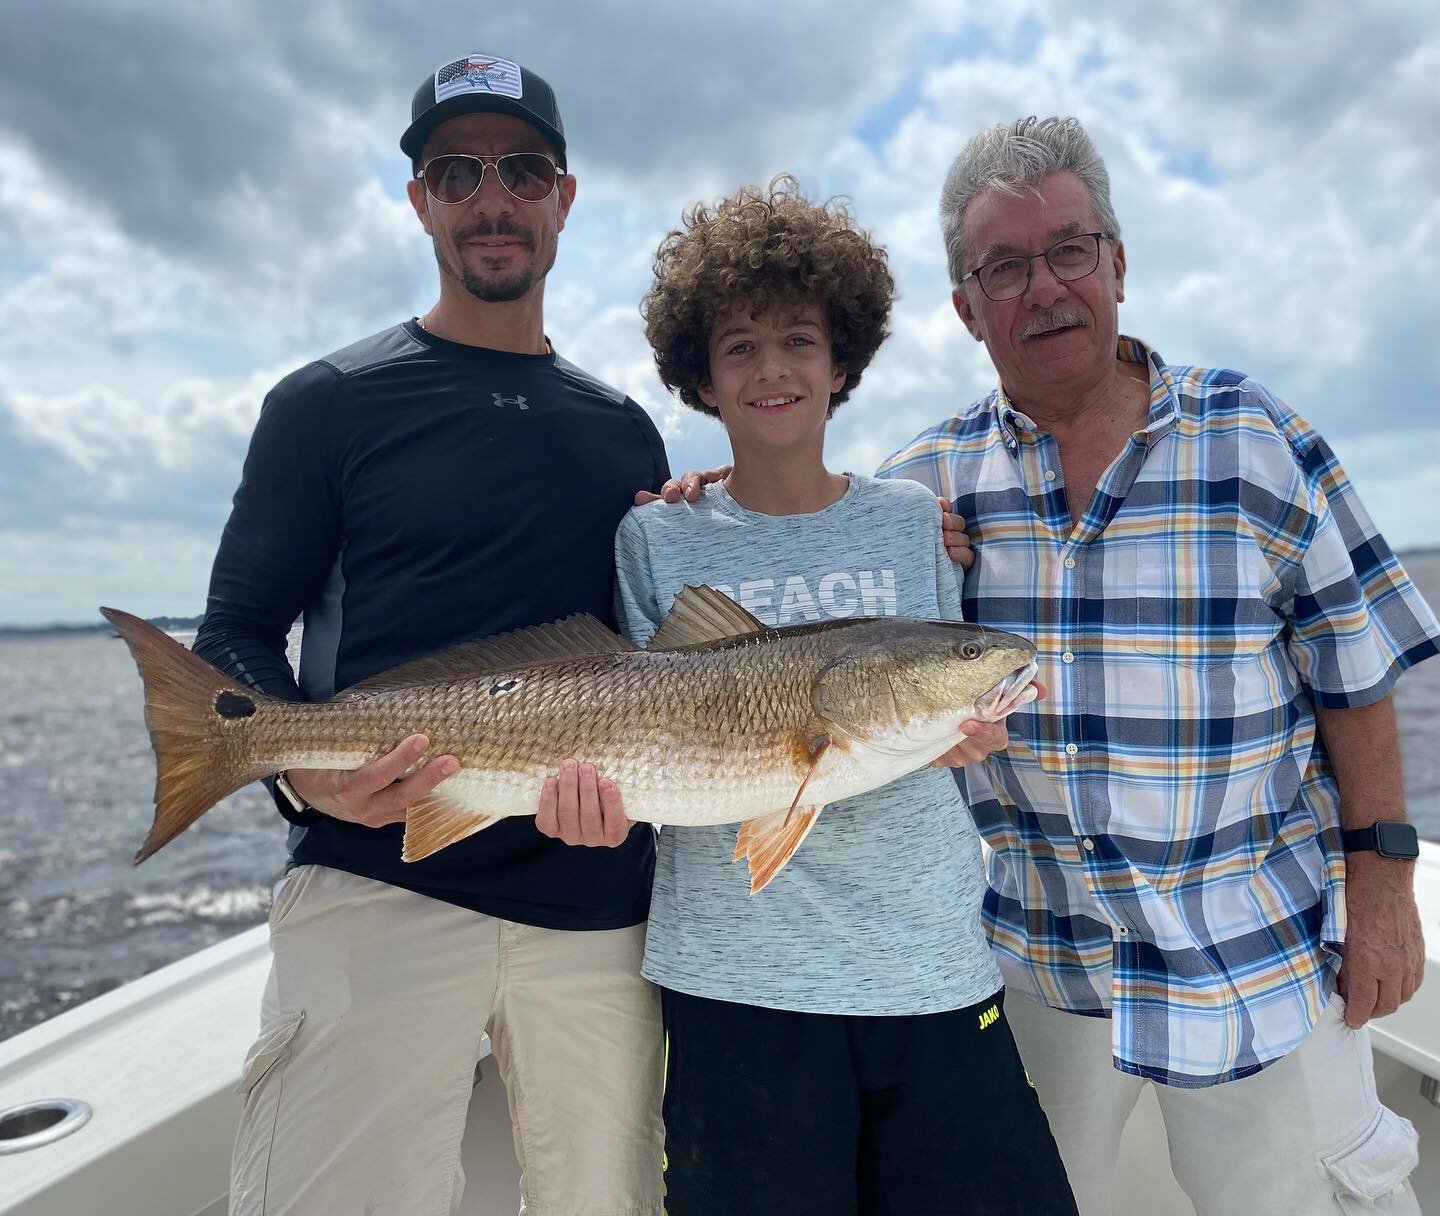 Absolute blast with the Langhof&rsquo;s. Multiple oversized reds, handful of sheeps and the first flounder of the spring. Saw 68* surface temp on my way in this PM. It&rsquo;s fixing to fire off! Let&rsquo;s get after it! 

904-770-0577
Jaxbeachfishi